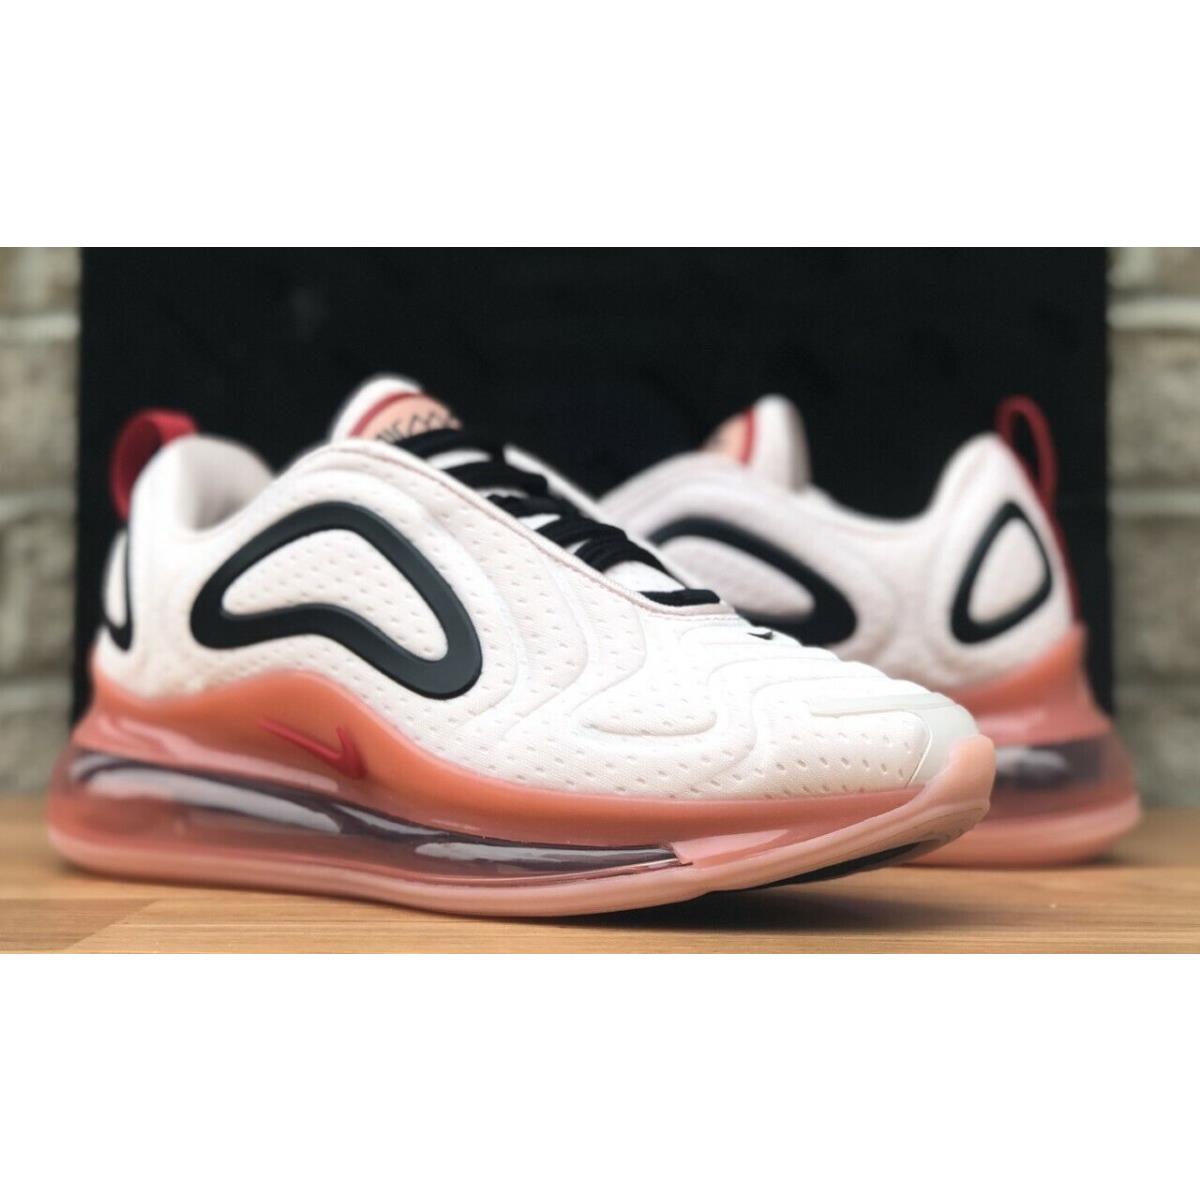 Nike shoes Air Max - Light Soft Pink / Gym Red 2